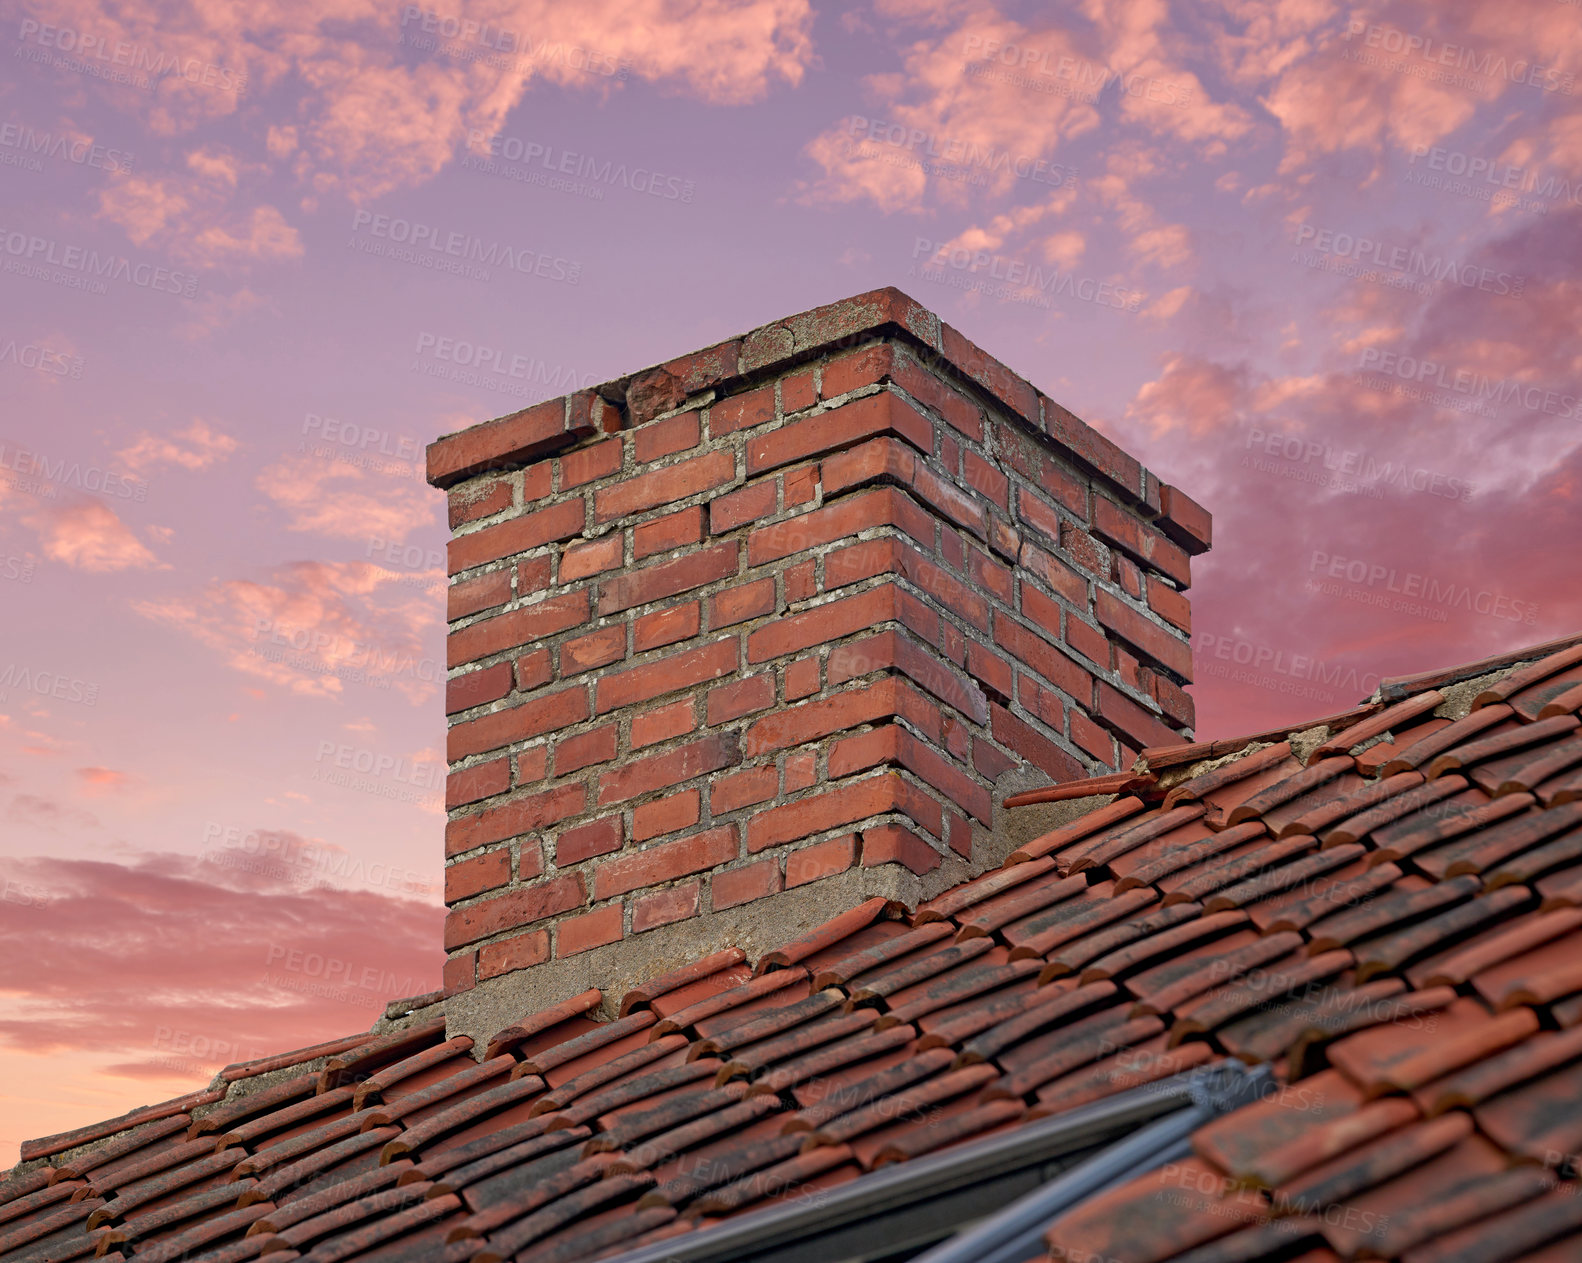 Buy stock photo Closeup of red brick chimney against a colorful sunset sky for combustion gases and home insulation on tiled roof. Architecture design on house building for smoke extraction from fireplace or furnace